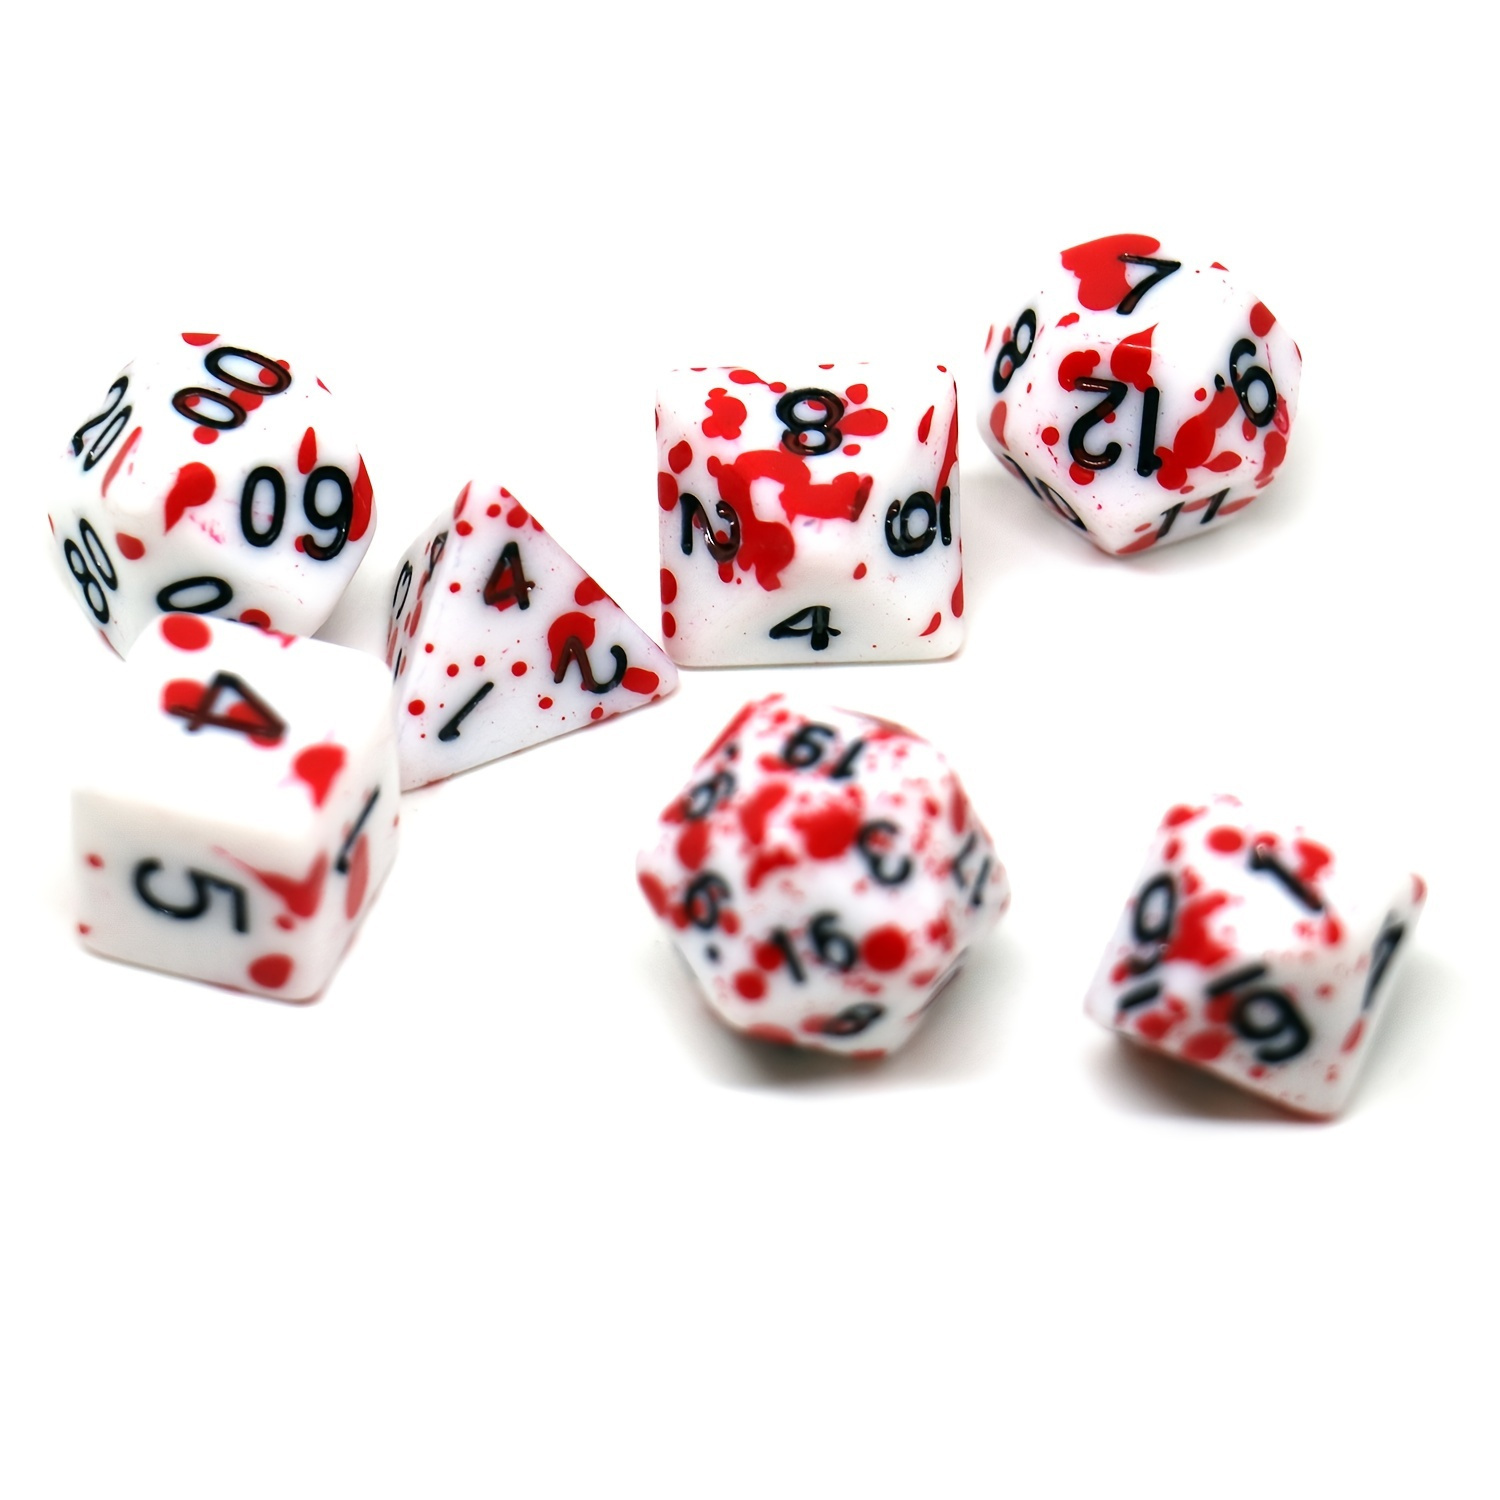 

7pcs/set With Box Blood Stain Dnd Dice Set Trpg Dice With Box Polyhedral Table Game Dice For Dungeons And Dragons Role-playing Rpg Dice Games